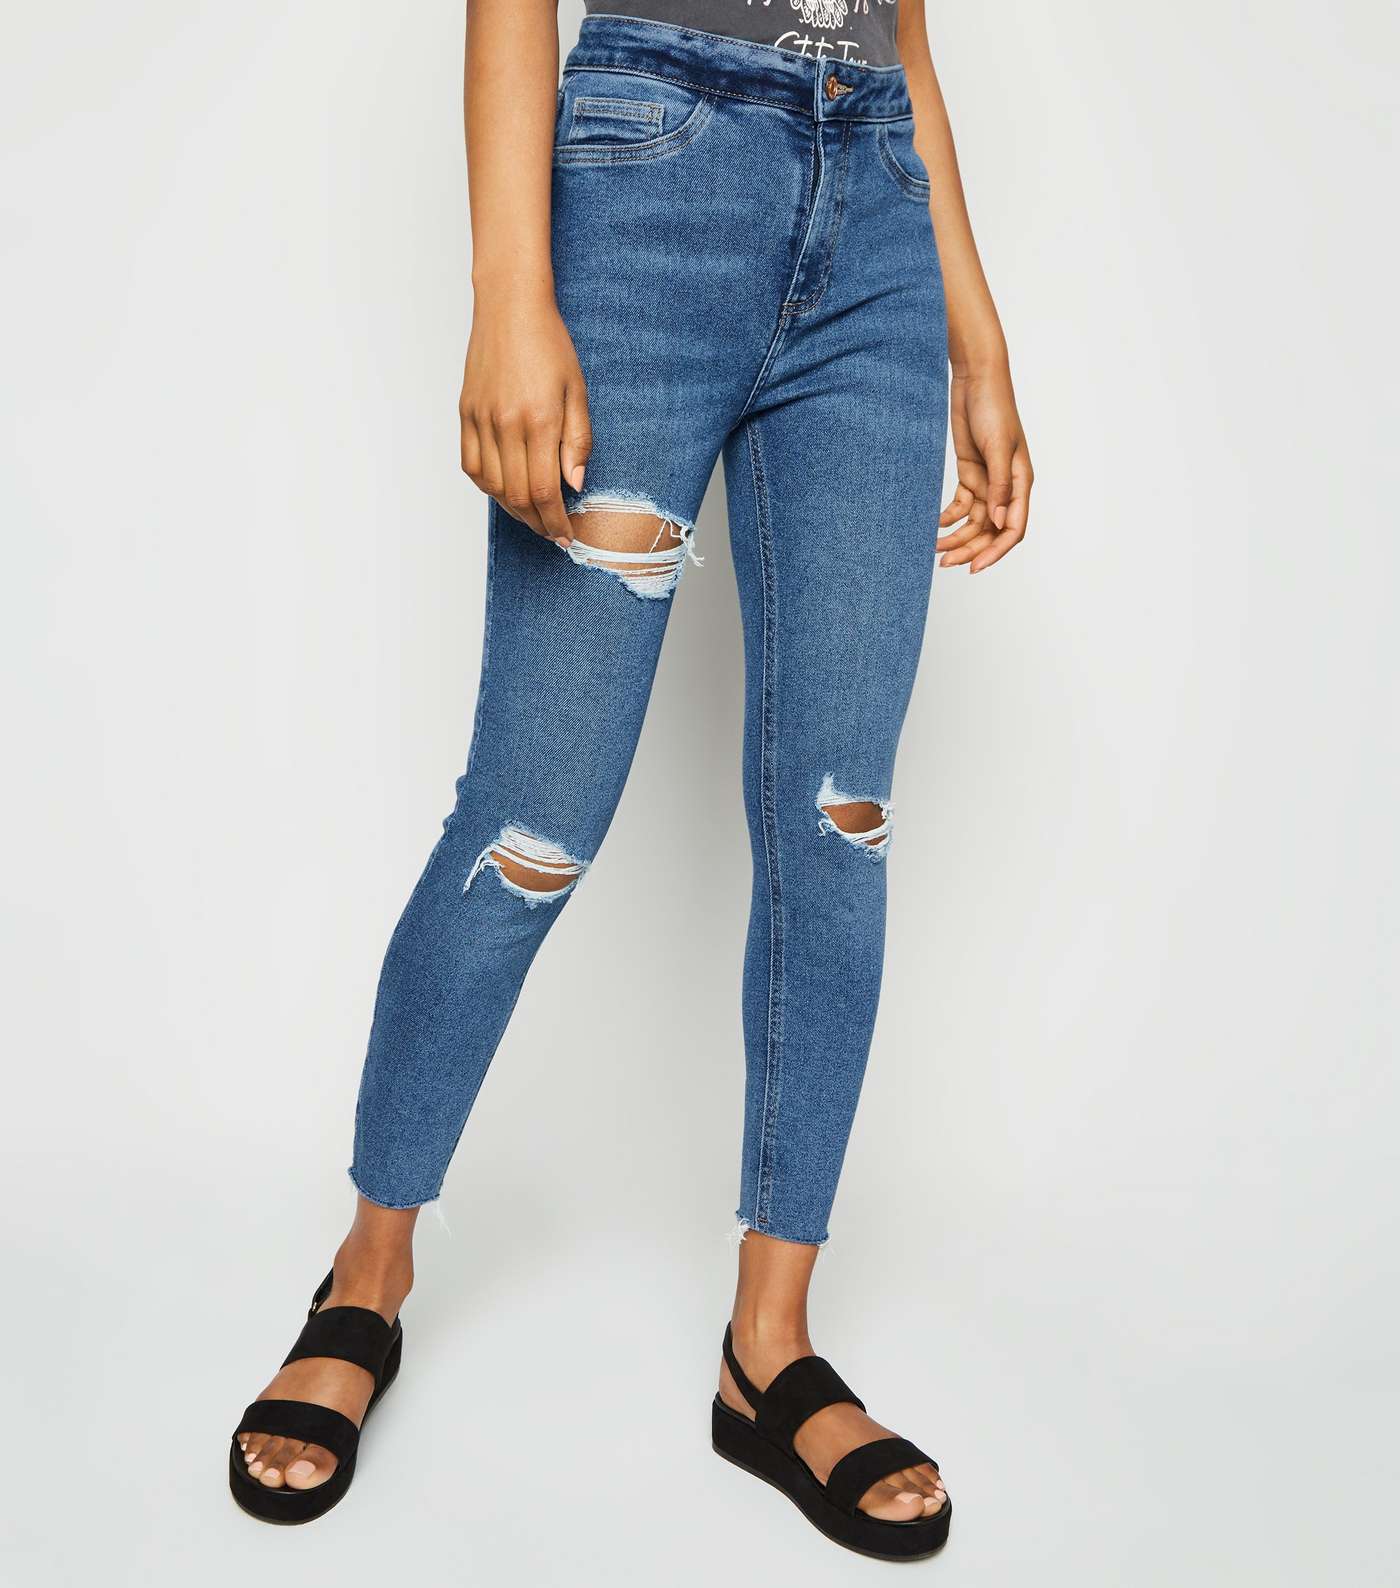 Petite Teal Ripped High Waist Super Skinny Jeans Image 2